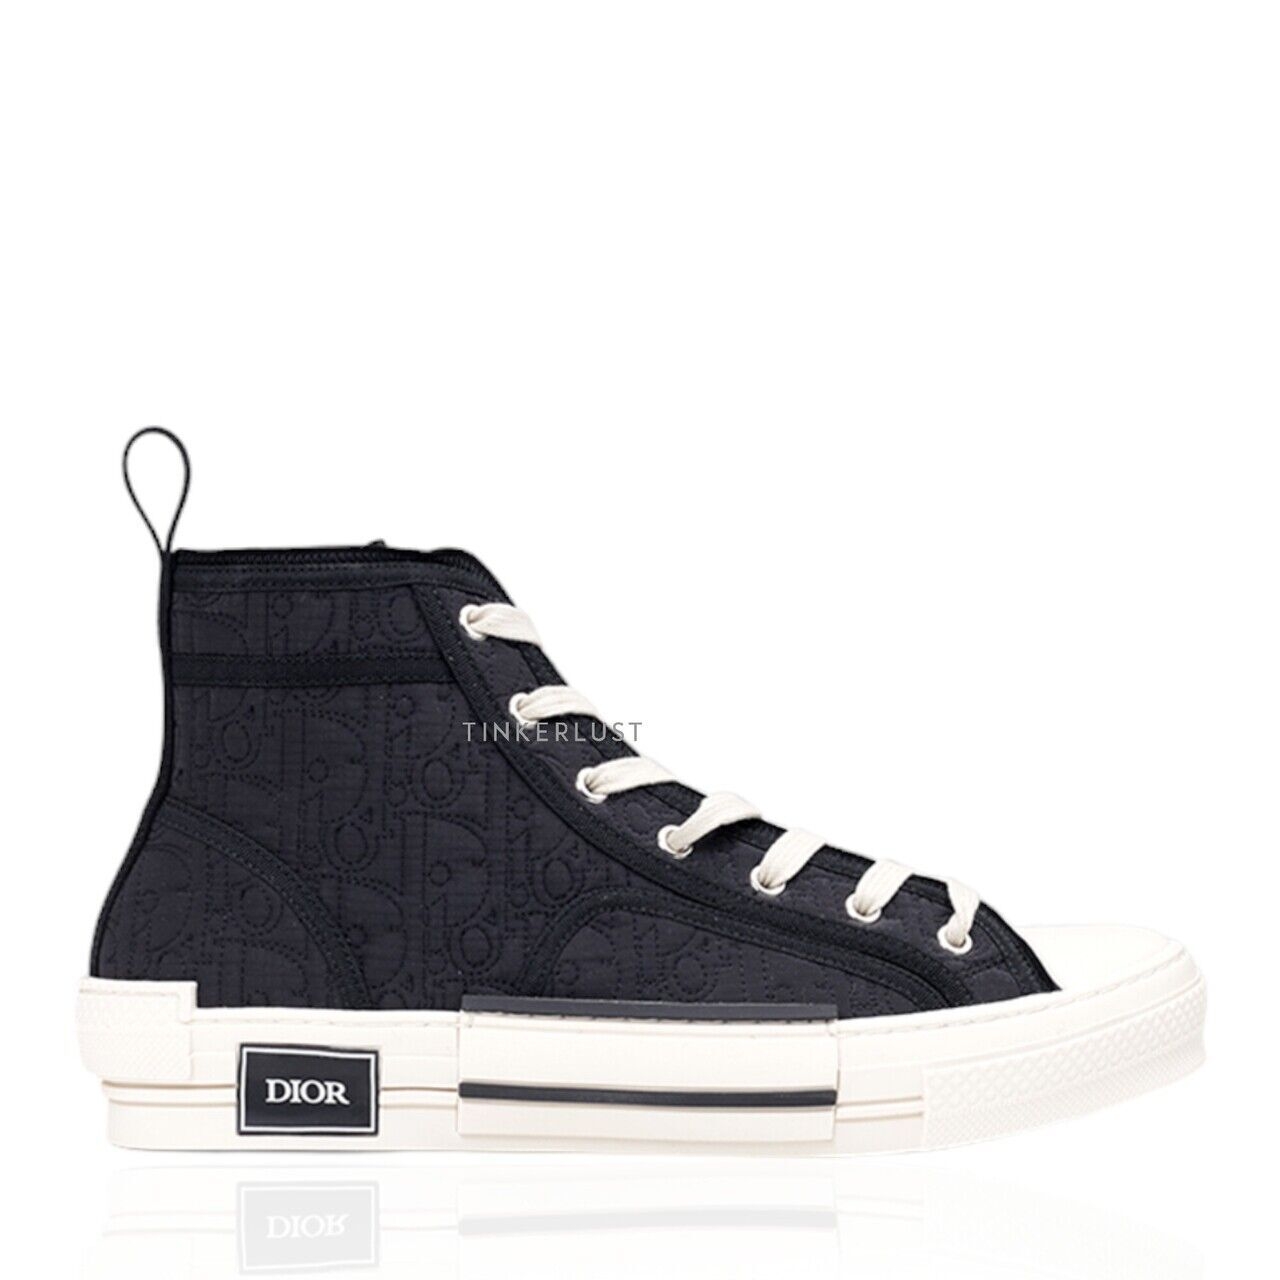 Christian Dior Oblique Kumo High-Top Black/White Sneakers